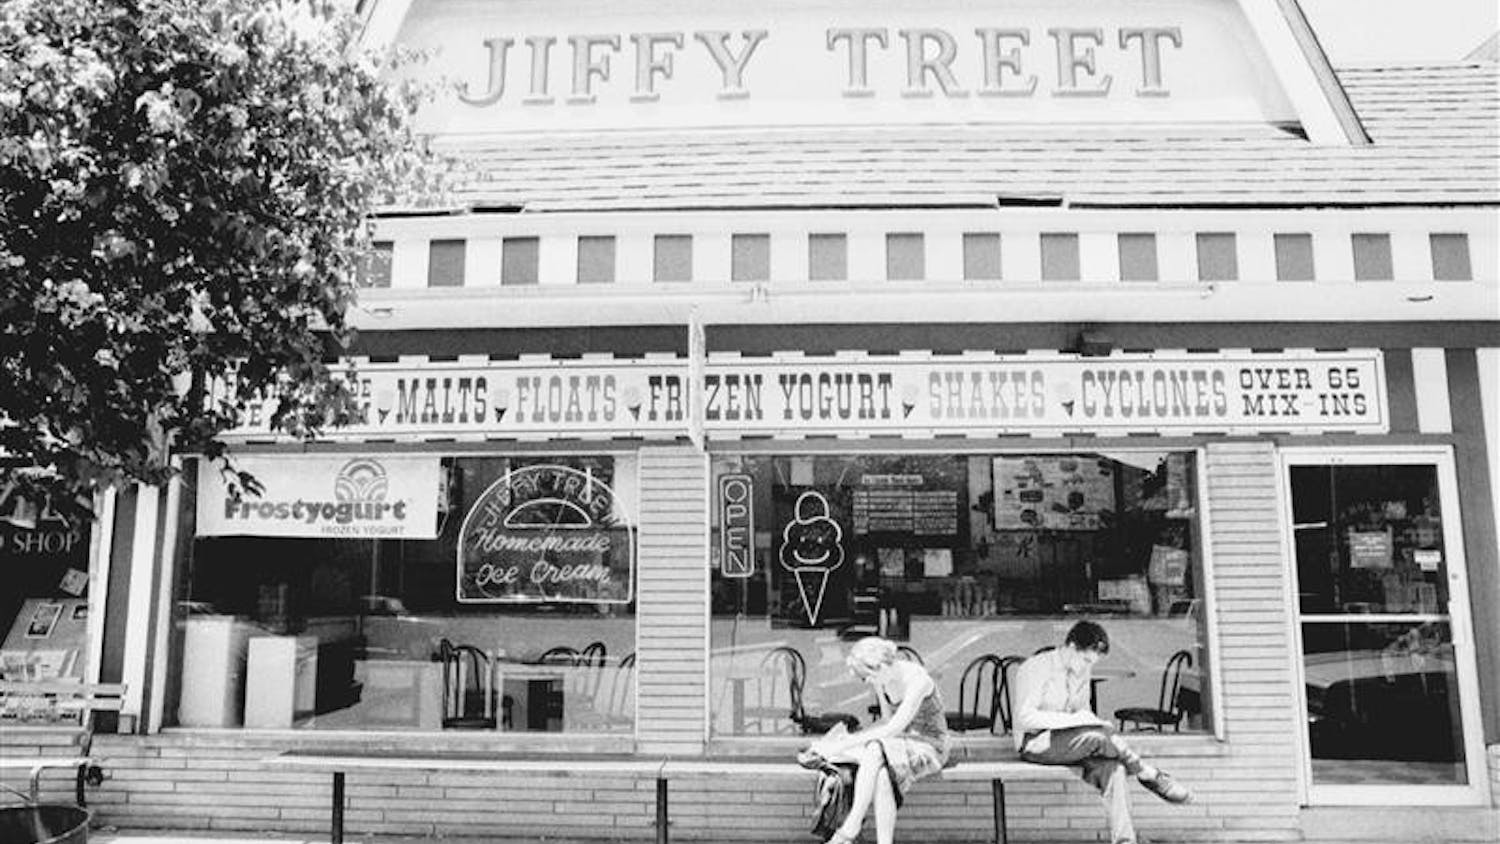 Students sit outside one of the four Jiffy Treets in Bloomington located at 425 E. Kirkwood Ave. The Ice cream chain is famous for its wide selection of flavors and its cyclones.